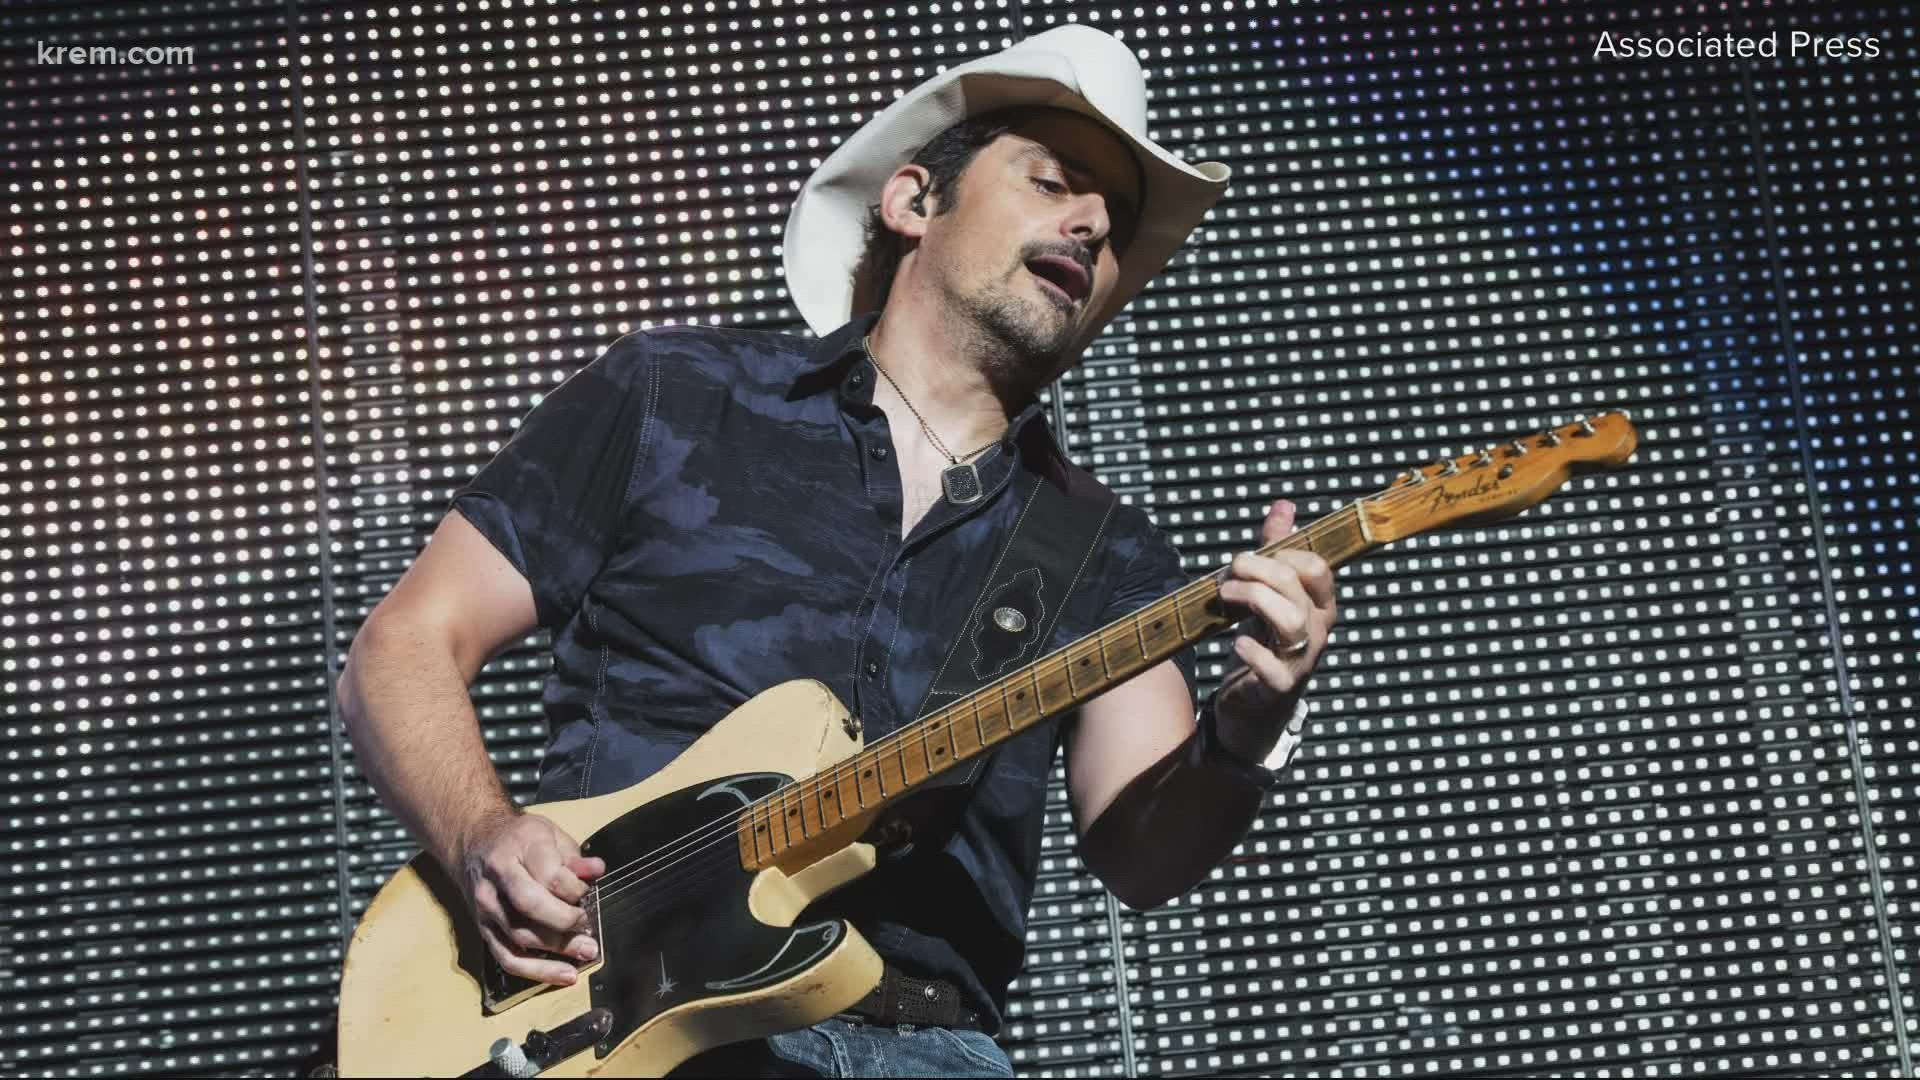 Country music star Brad Paisley will play at Northern Quest on June 26, 2022.